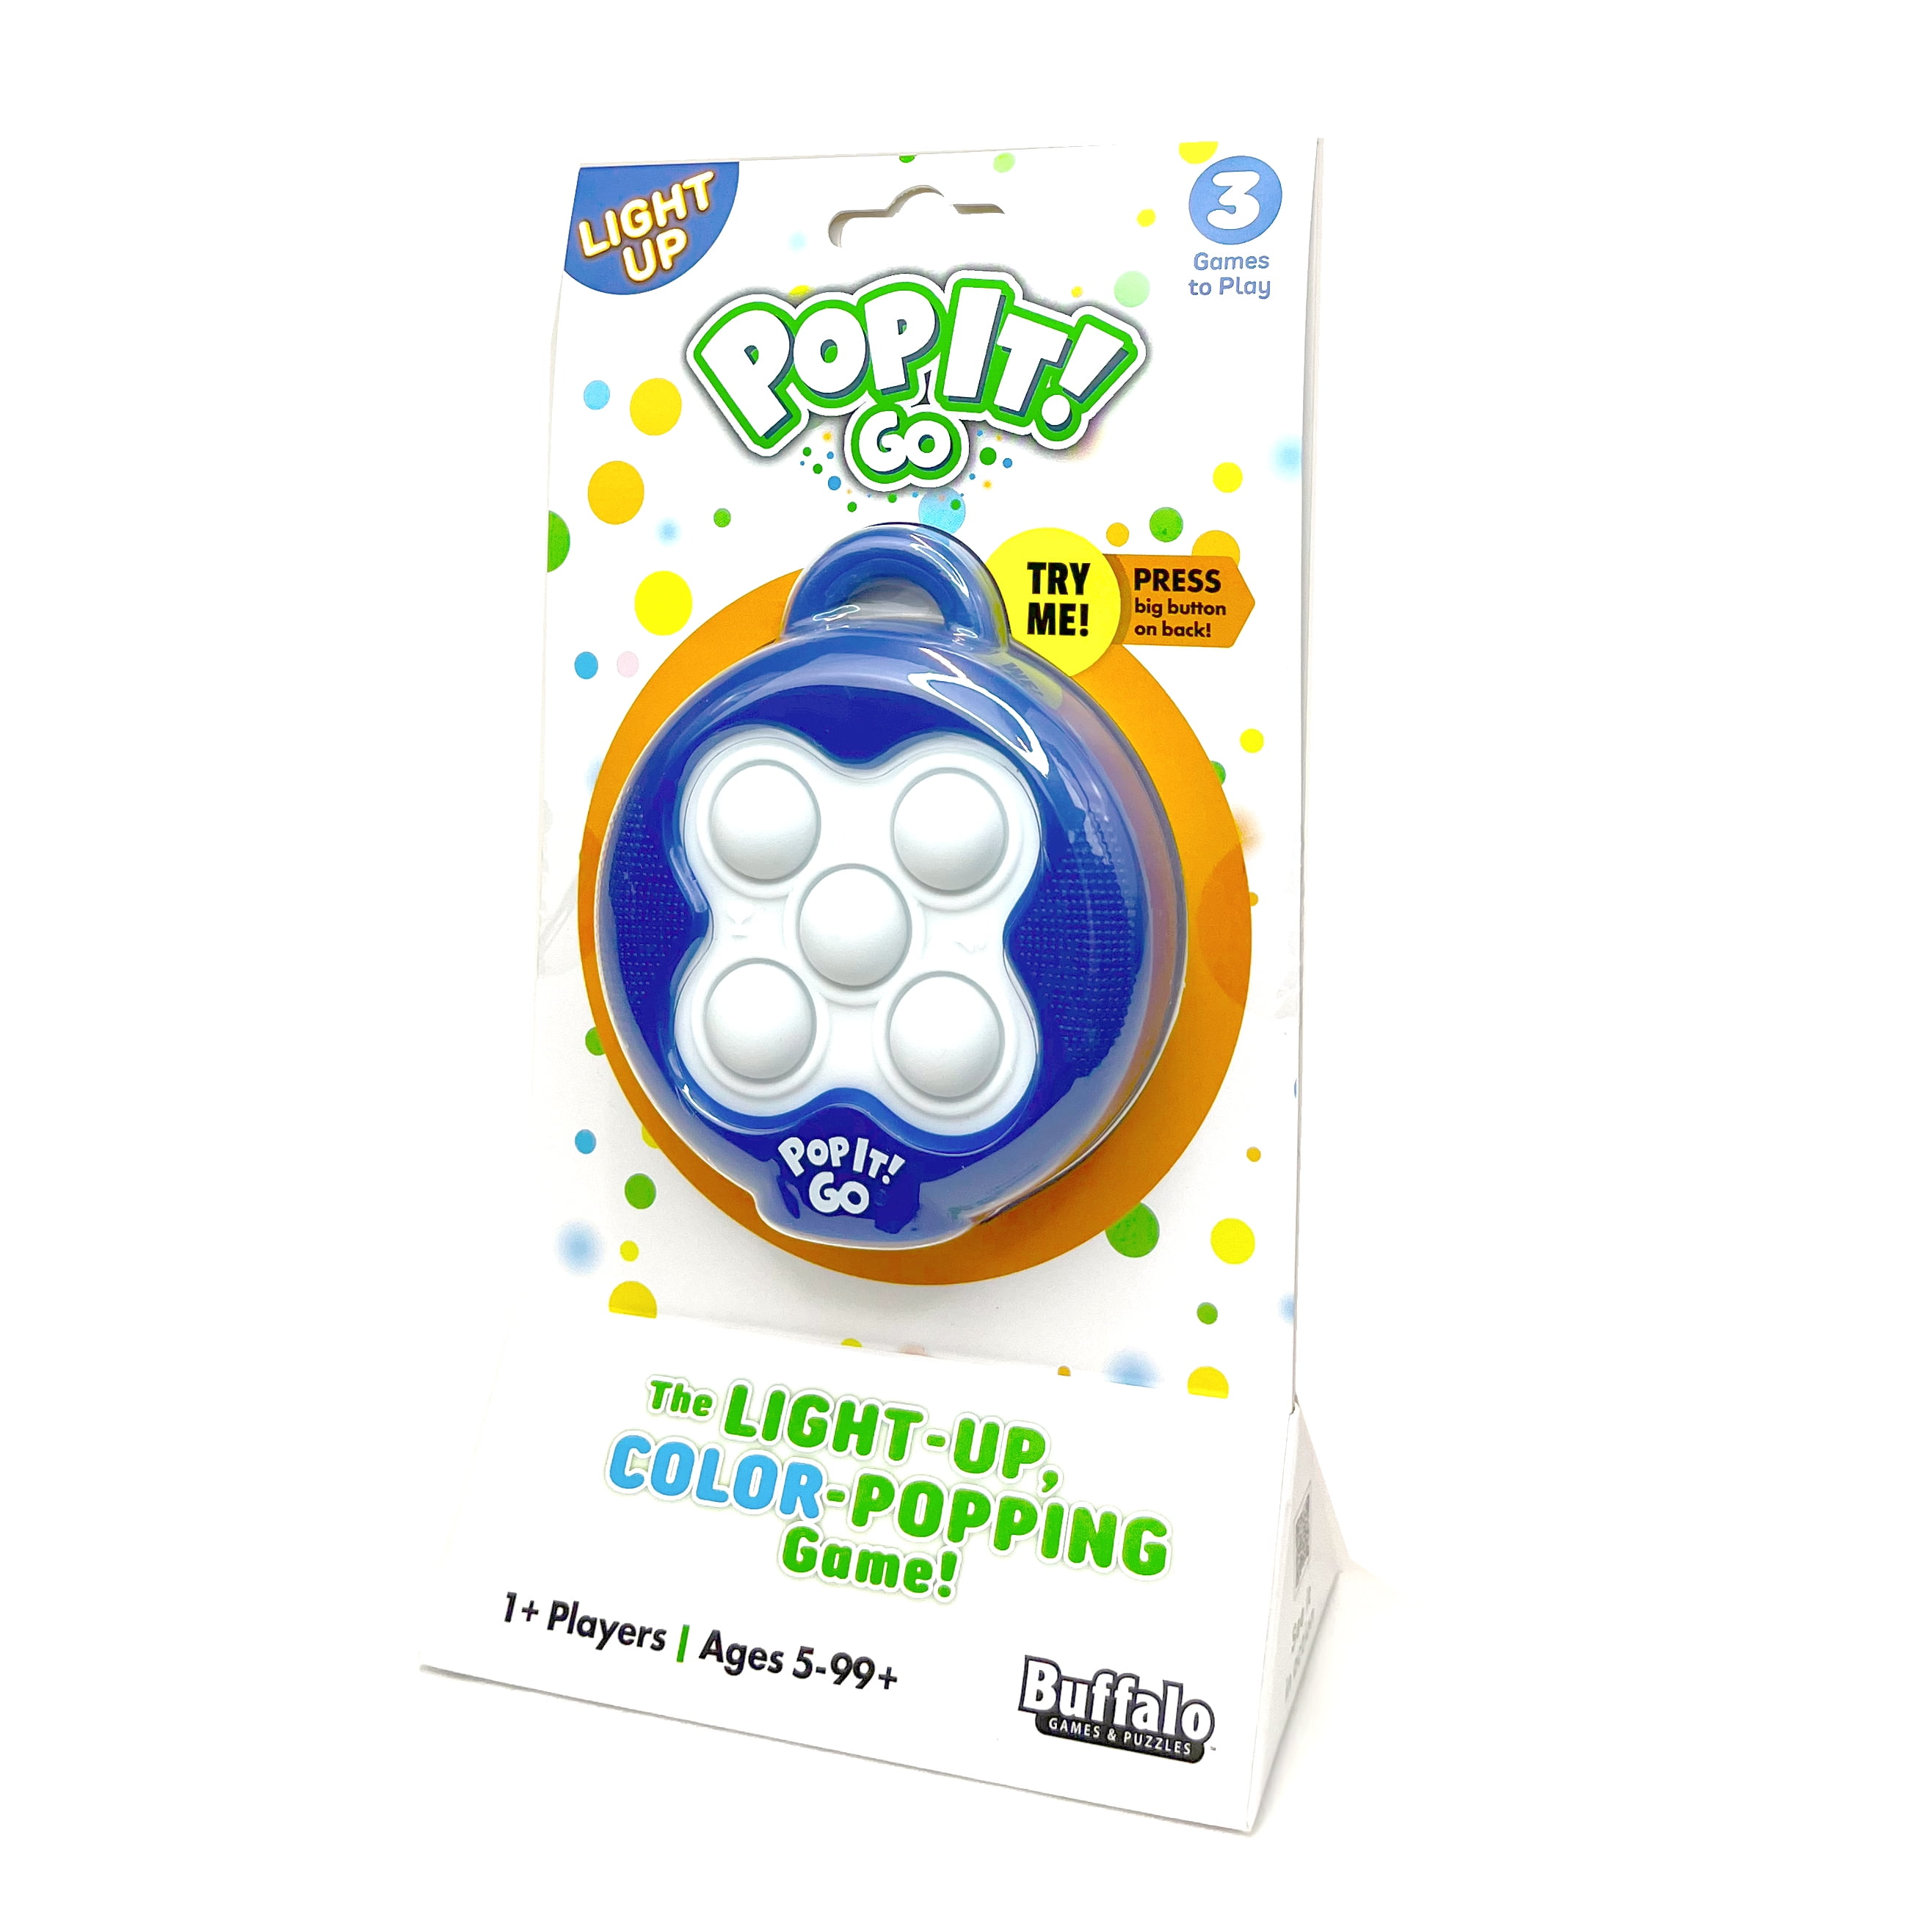 Pop It Go Bubble Popping Sensory Game 8.13 inch x 4.5 inch for Children Ages 5+ by Buffalo Games $9.97